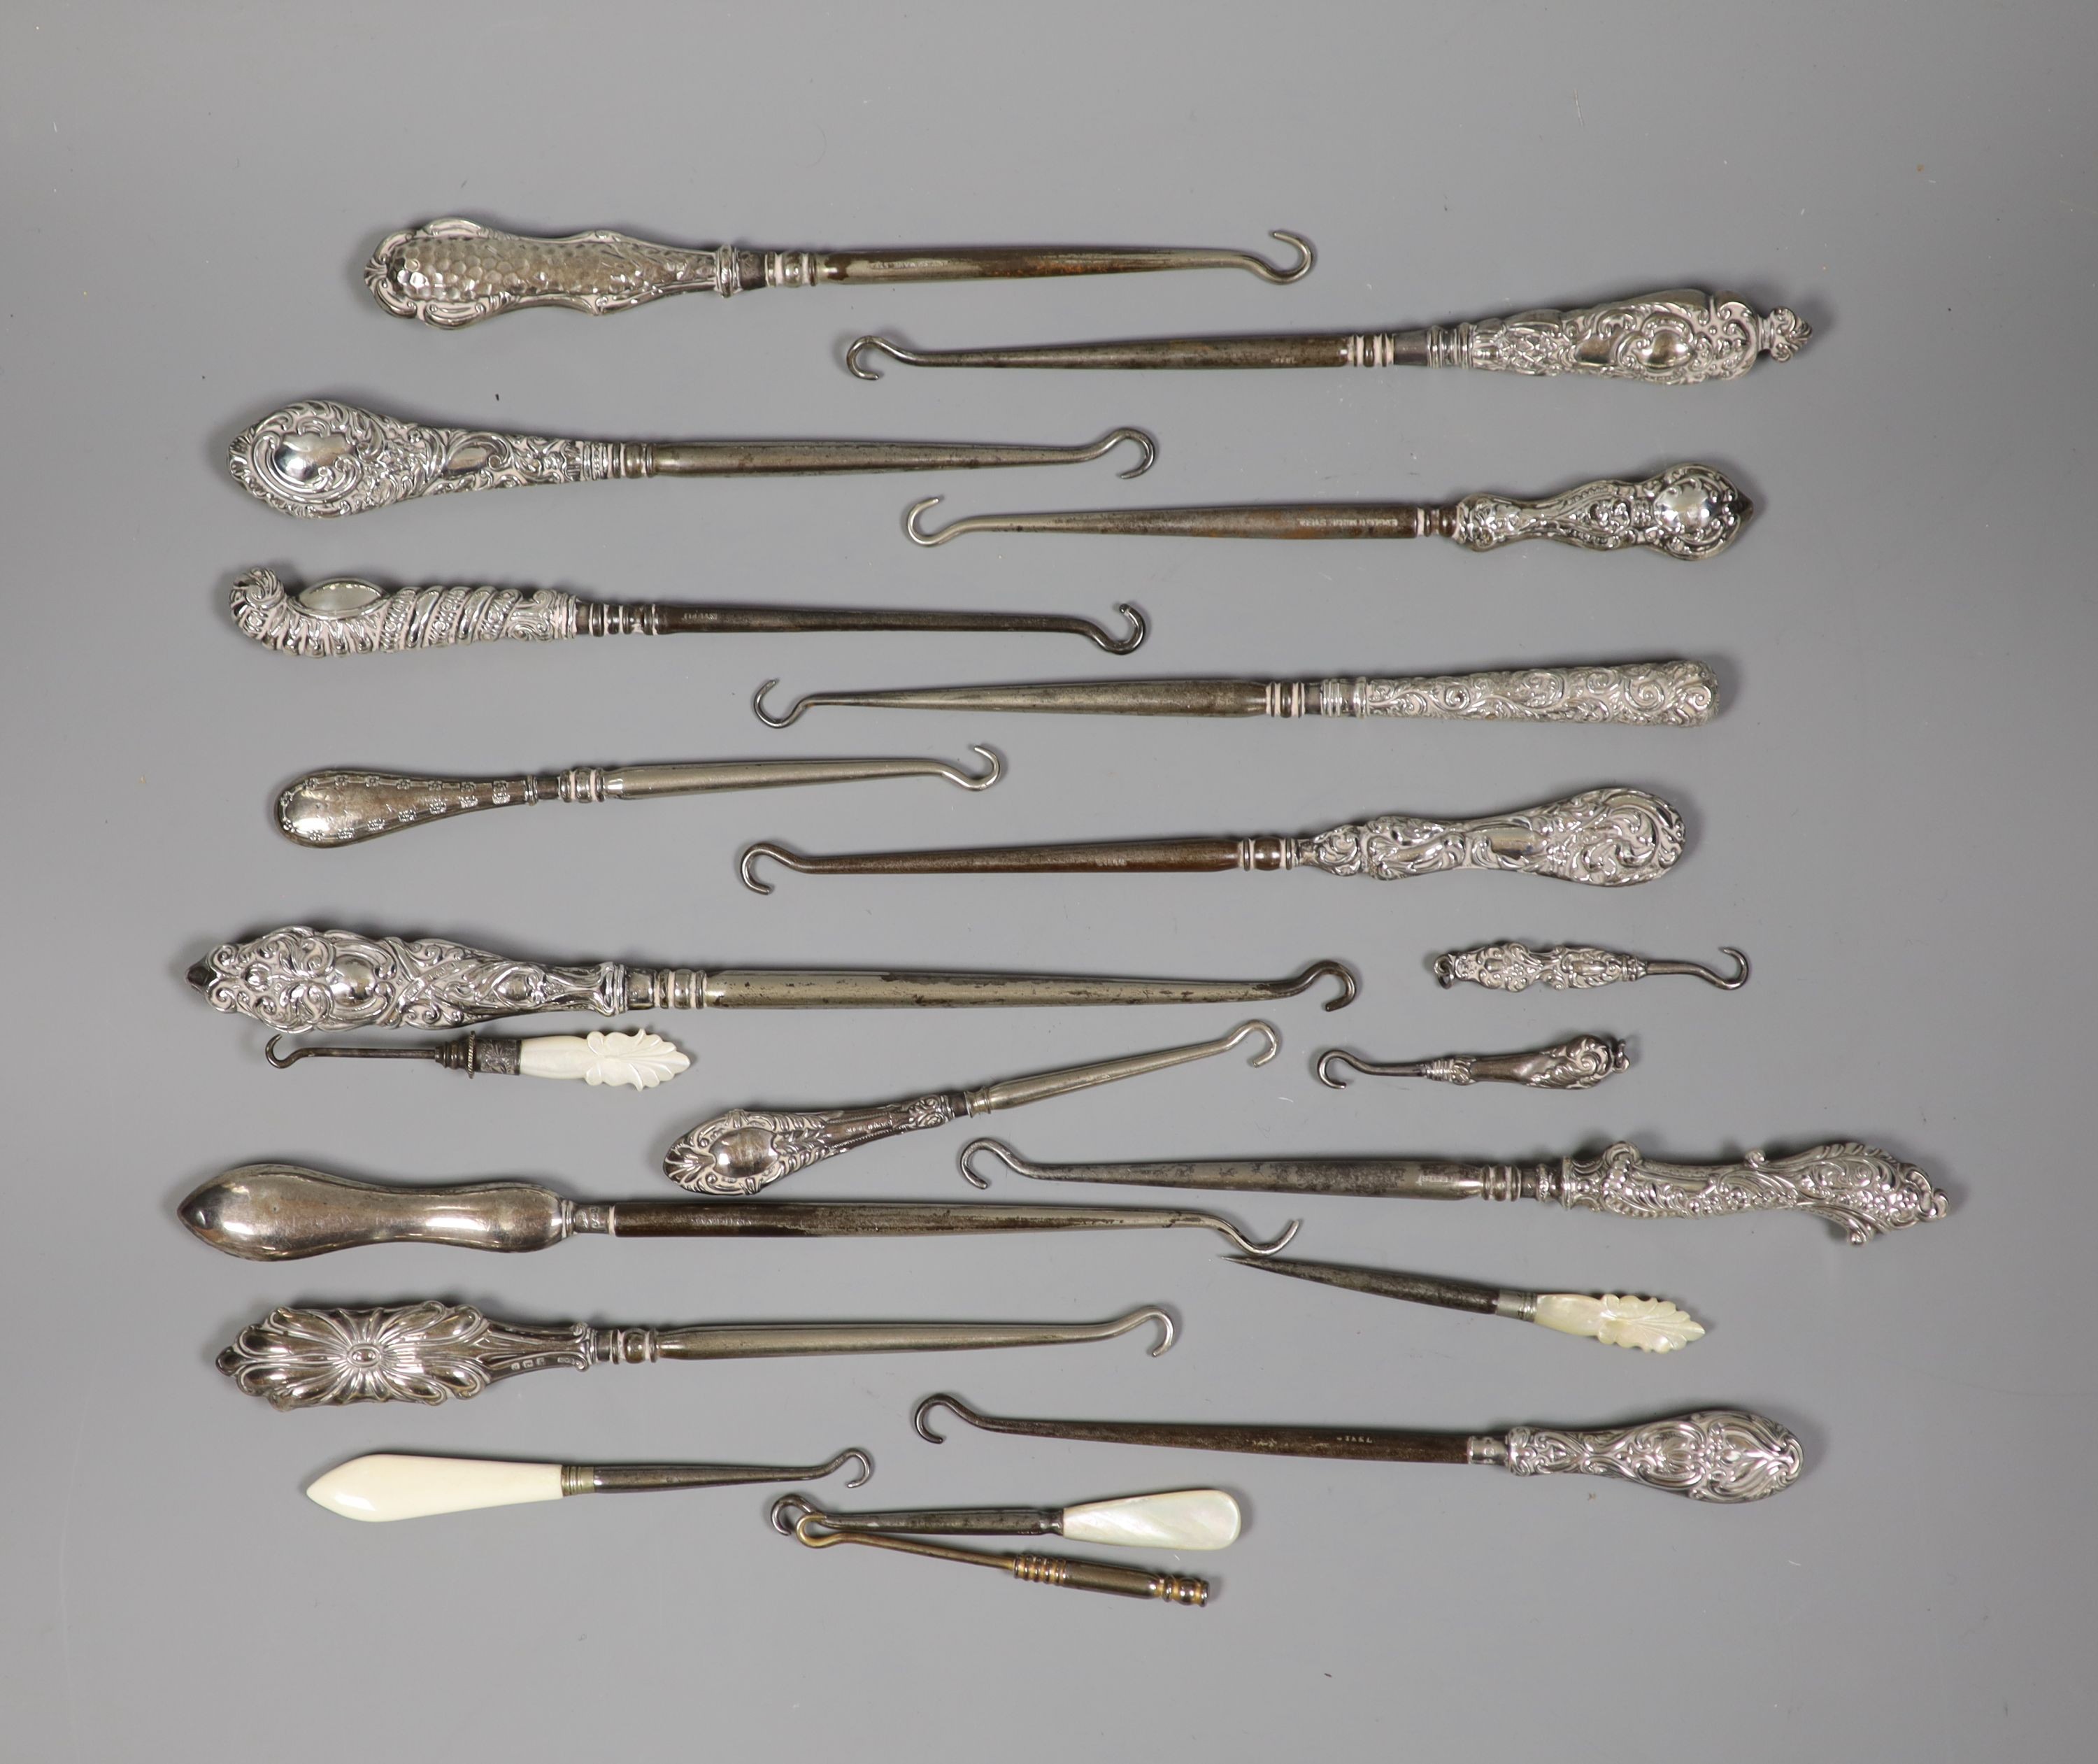 A collection of assorted silver handle button hooks and a nail implement.